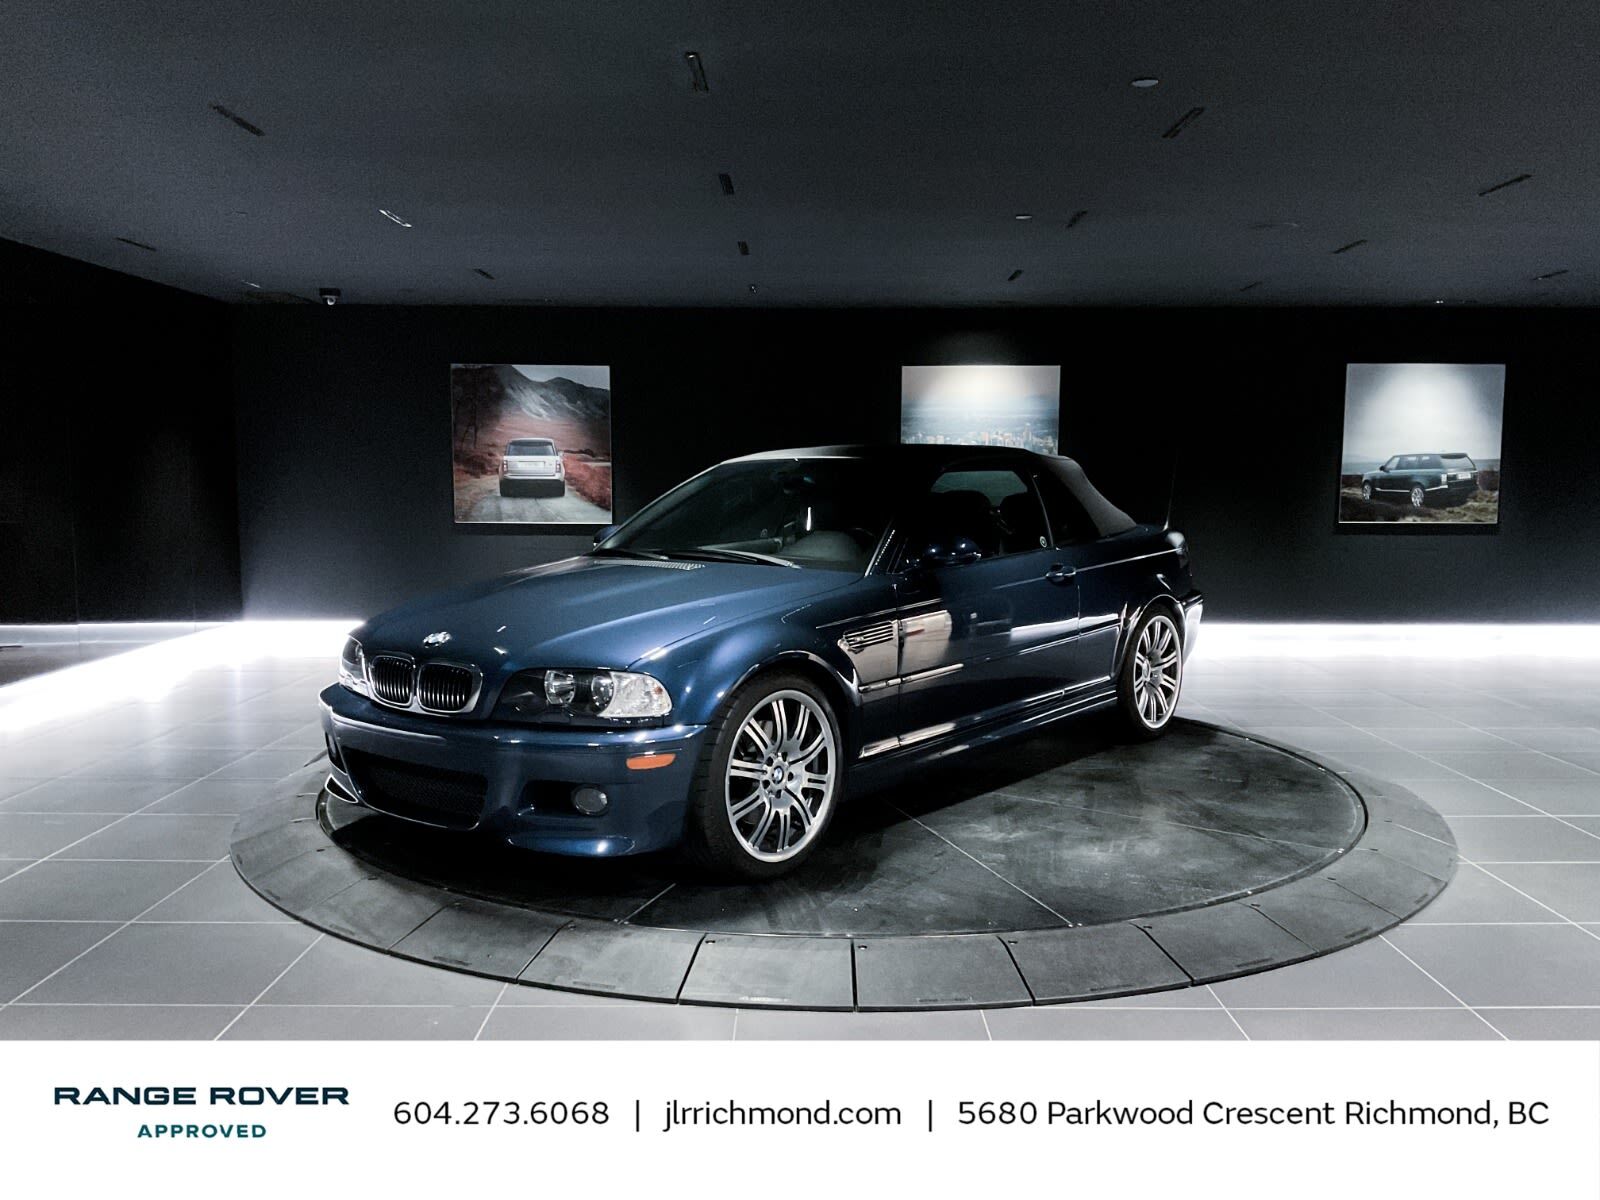 2006 BMW 3 Series M3 | Convertible | 6 Speed Manual | Heated Seats